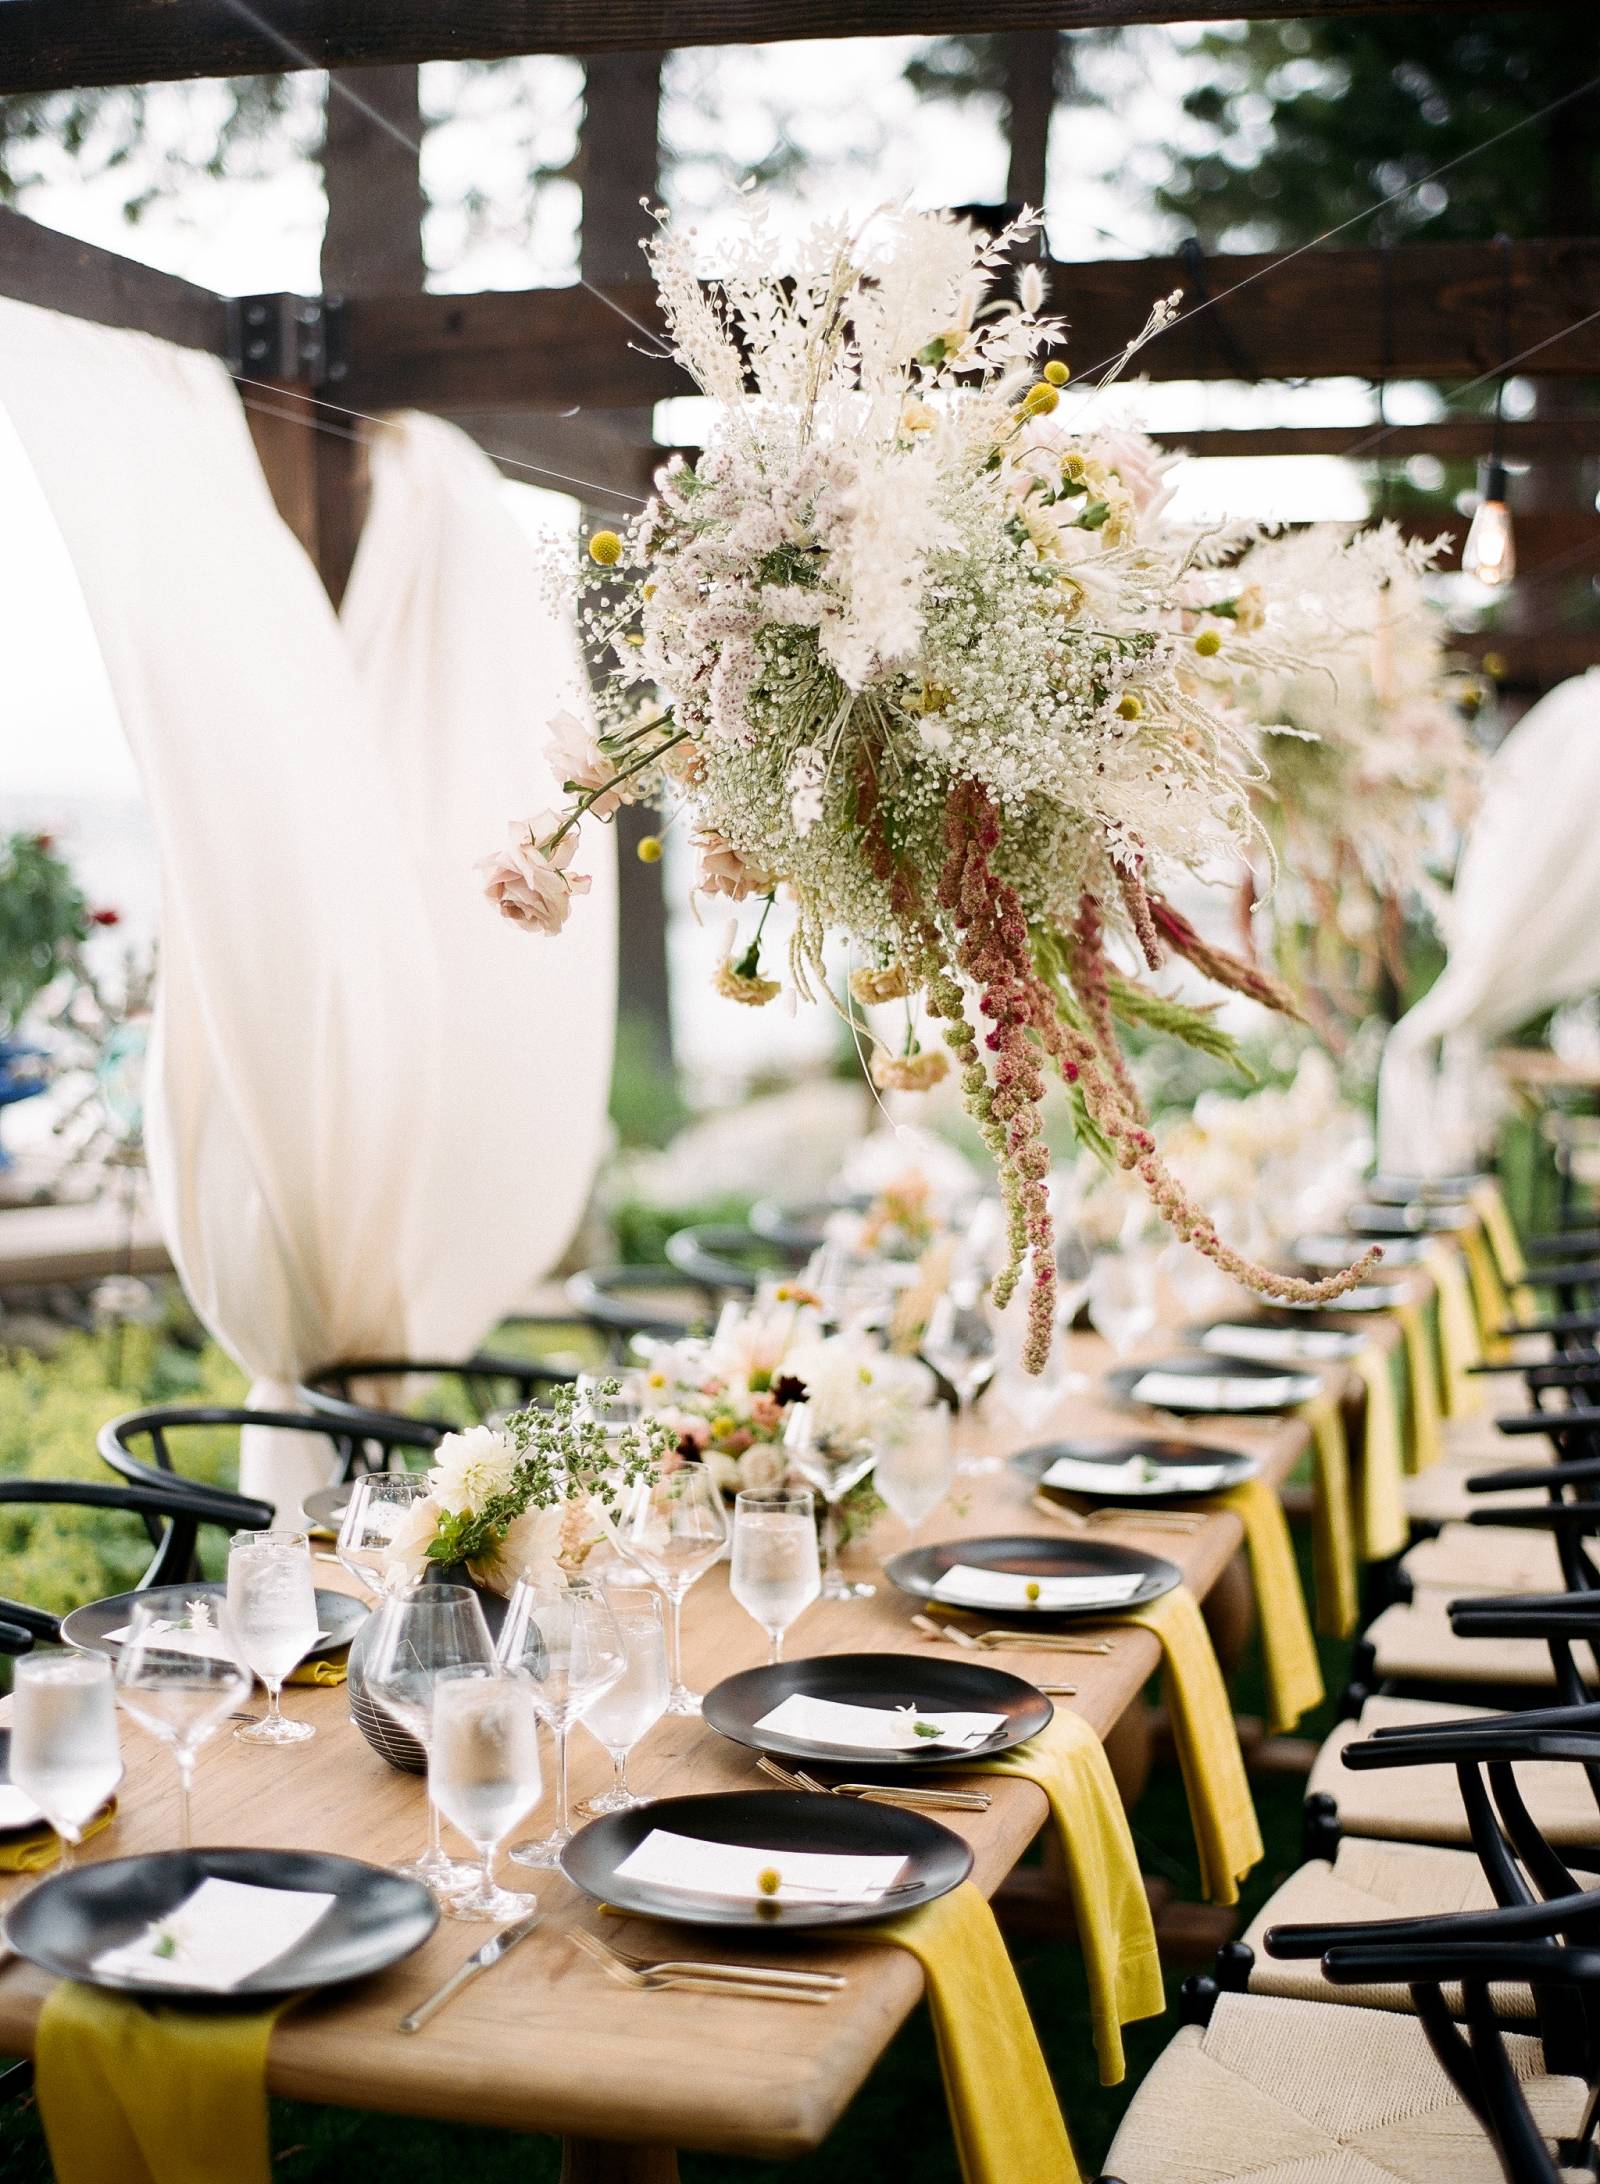 Best of 2019: Wedding Reception Tablescapes